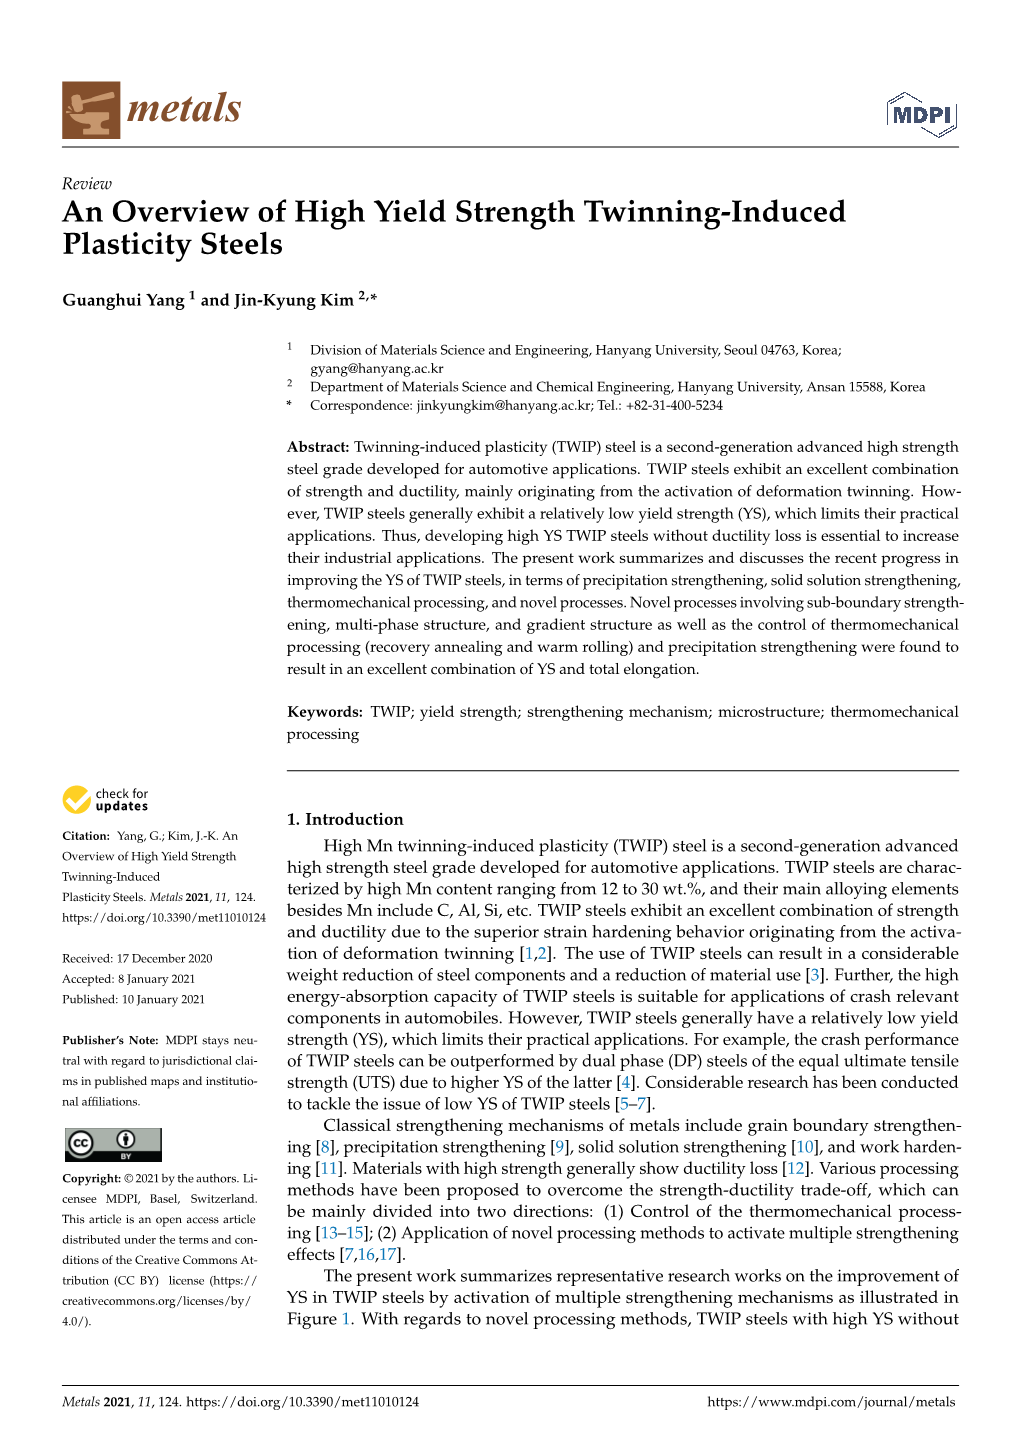 An Overview of High Yield Strength Twinning-Induced Plasticity Steels